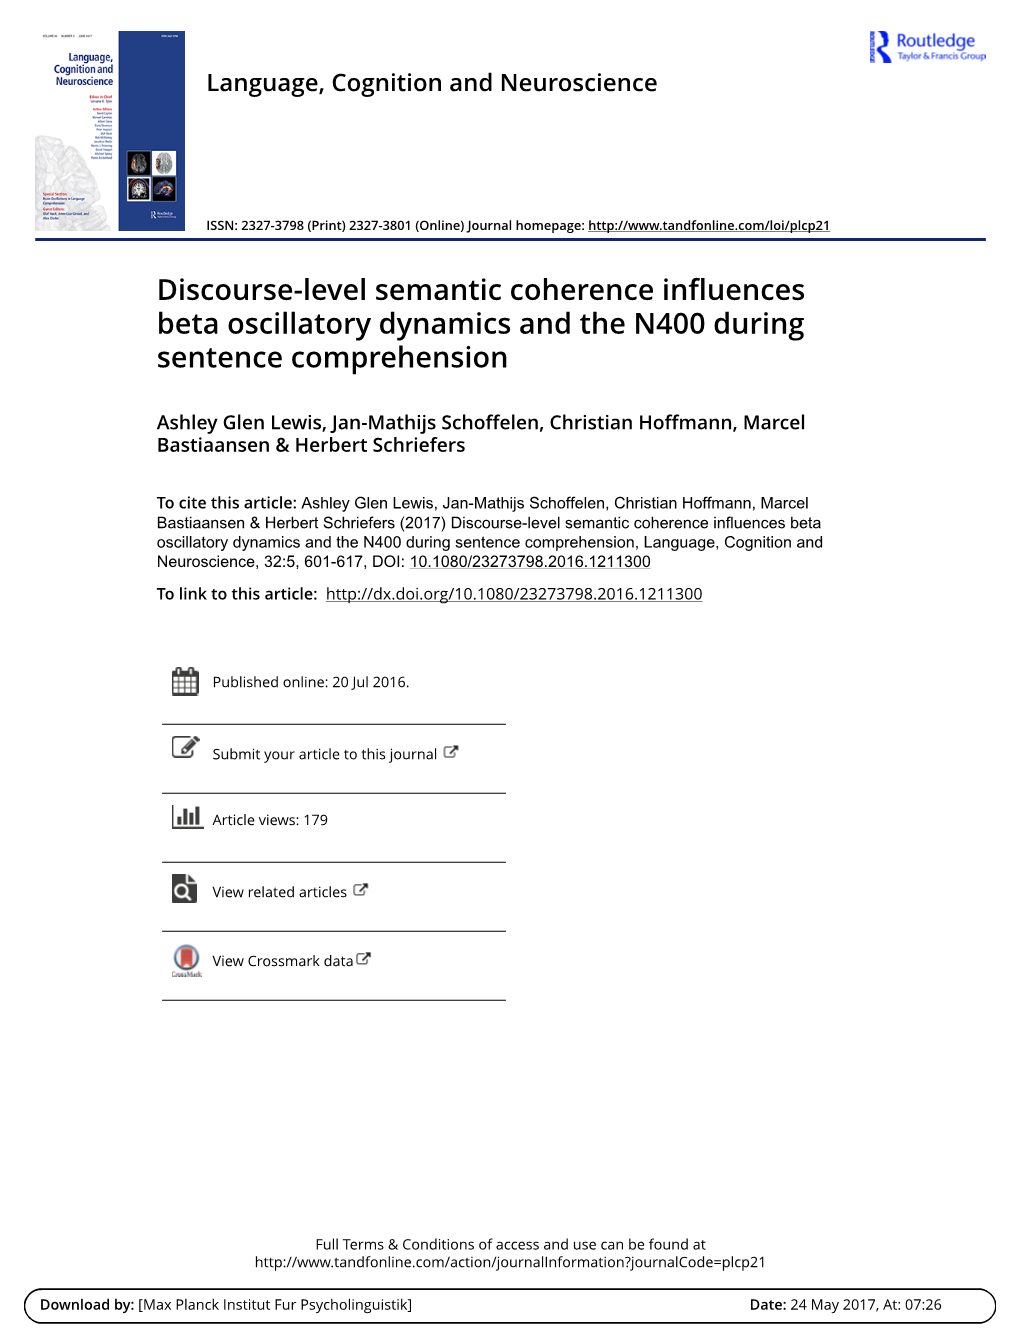 Discourse-Level Semantic Coherence Influences Beta Oscillatory Dynamics and the N400 During Sentence Comprehension